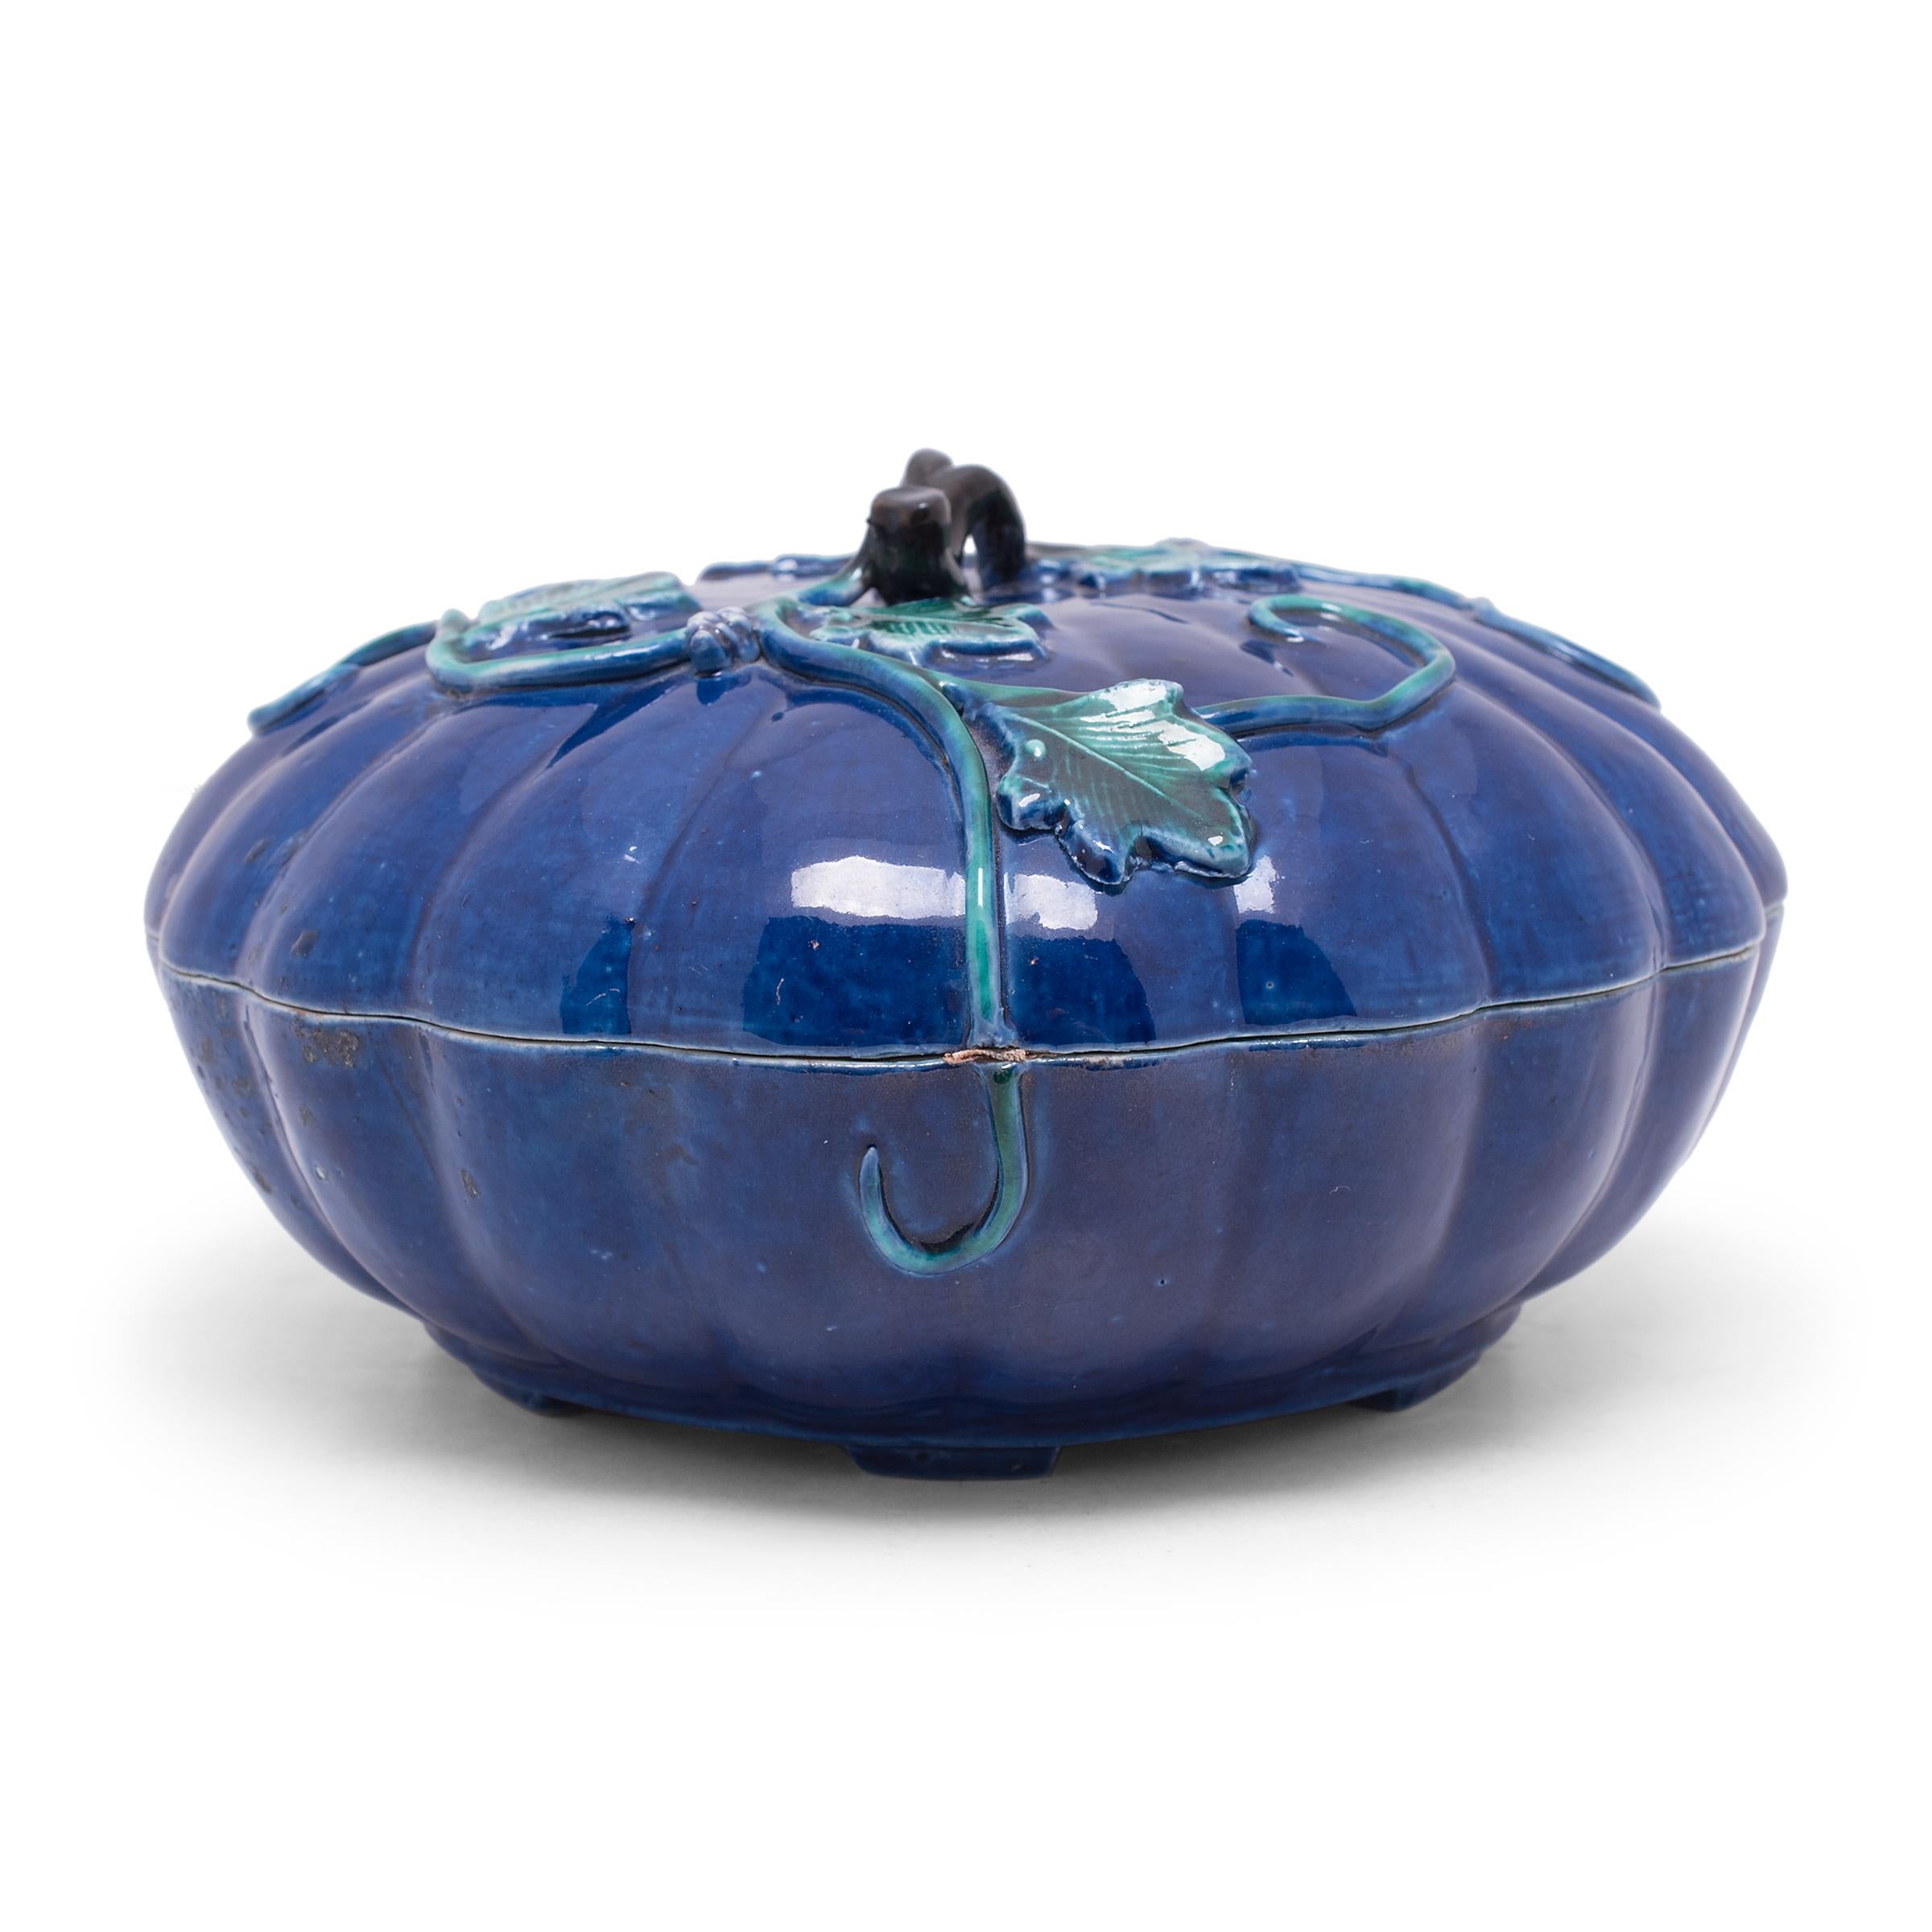 With ribbed sides and a vine-like handle, this porcelain trinket box resembles a squash or gourd, a common symbol for abundance, longevity, and a large, happy family. A royal blue glaze coats the exterior, accented by a contrasting turquoise glaze